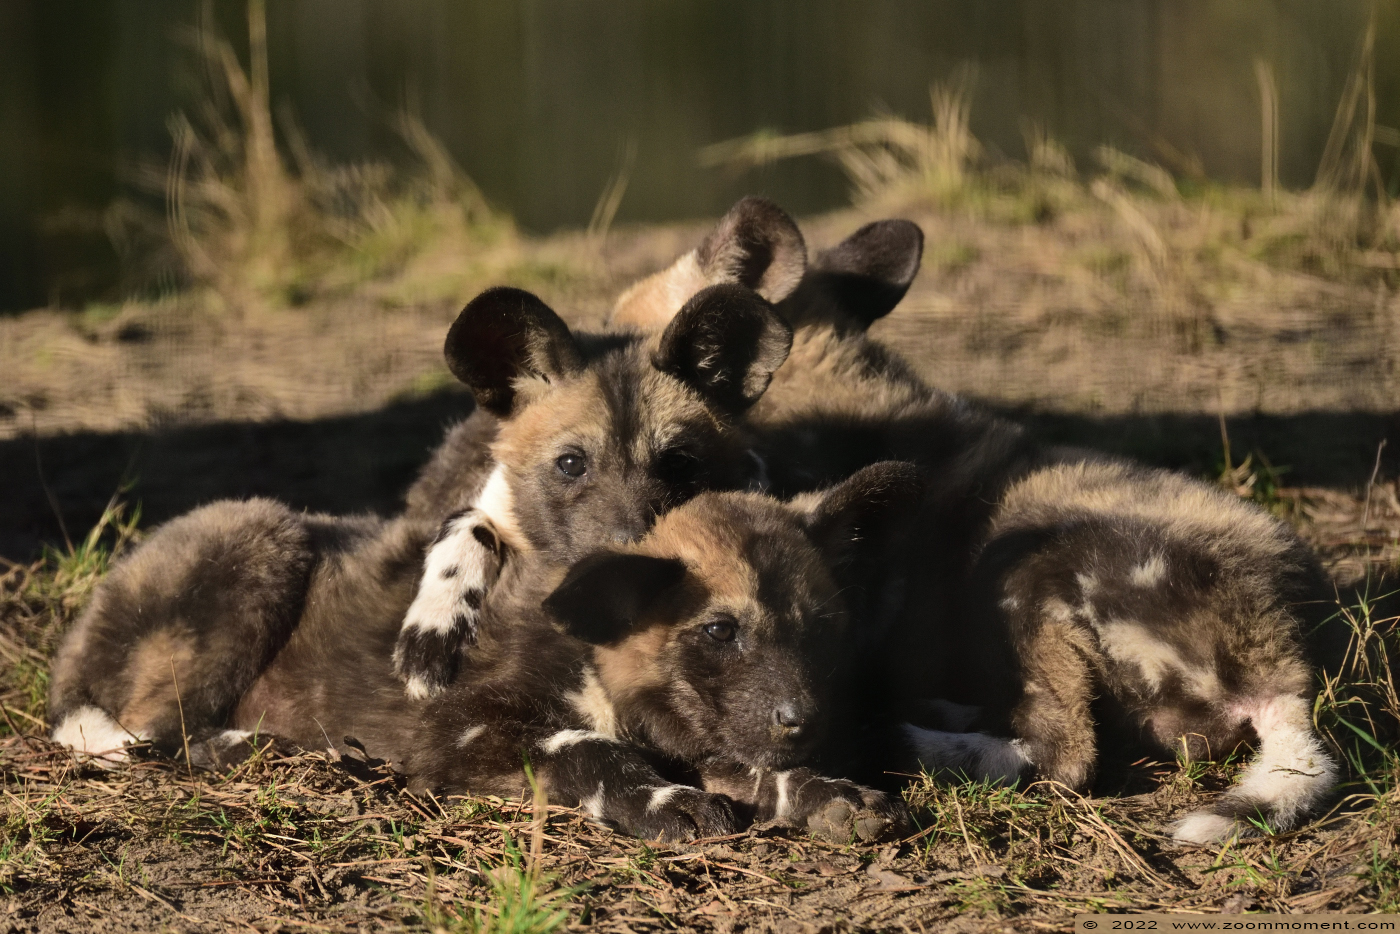 Afrikaanse wilde hond ( Lycaon pictus ) African wild dog
Pups, born 10 Januari 2022, on the picture about 3 weeks old

Trefwoorden: Safaripark Beekse Bergen Afrikaanse wilde hond Lycaon pictus African wild dog pup